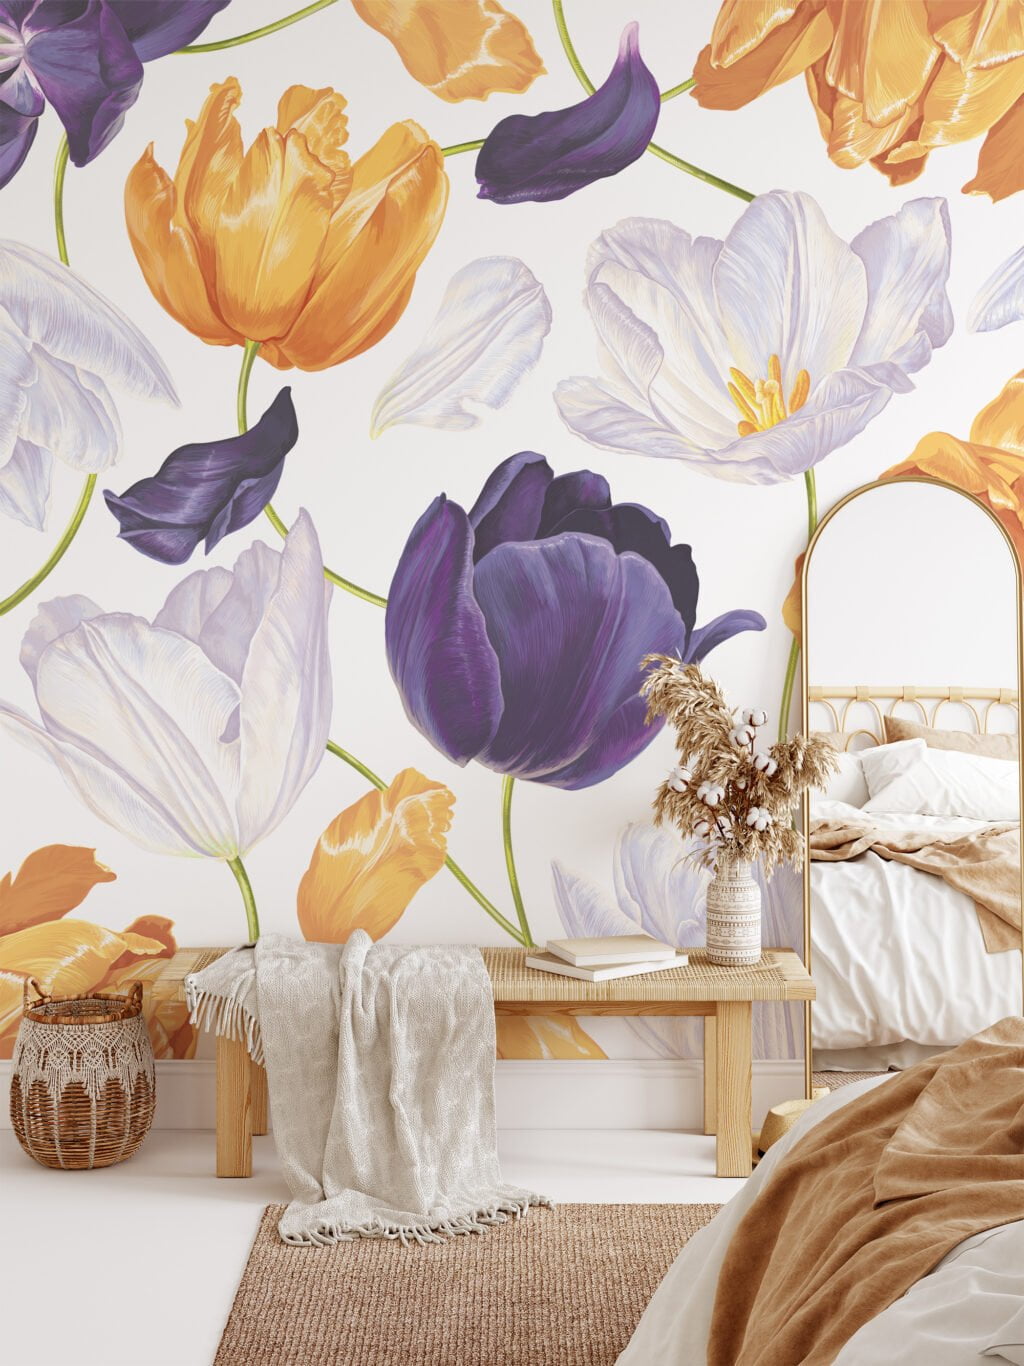 Elegant Soft Giant Peony Flowers Illustration Wallcovering for a Chic and Modern Decor